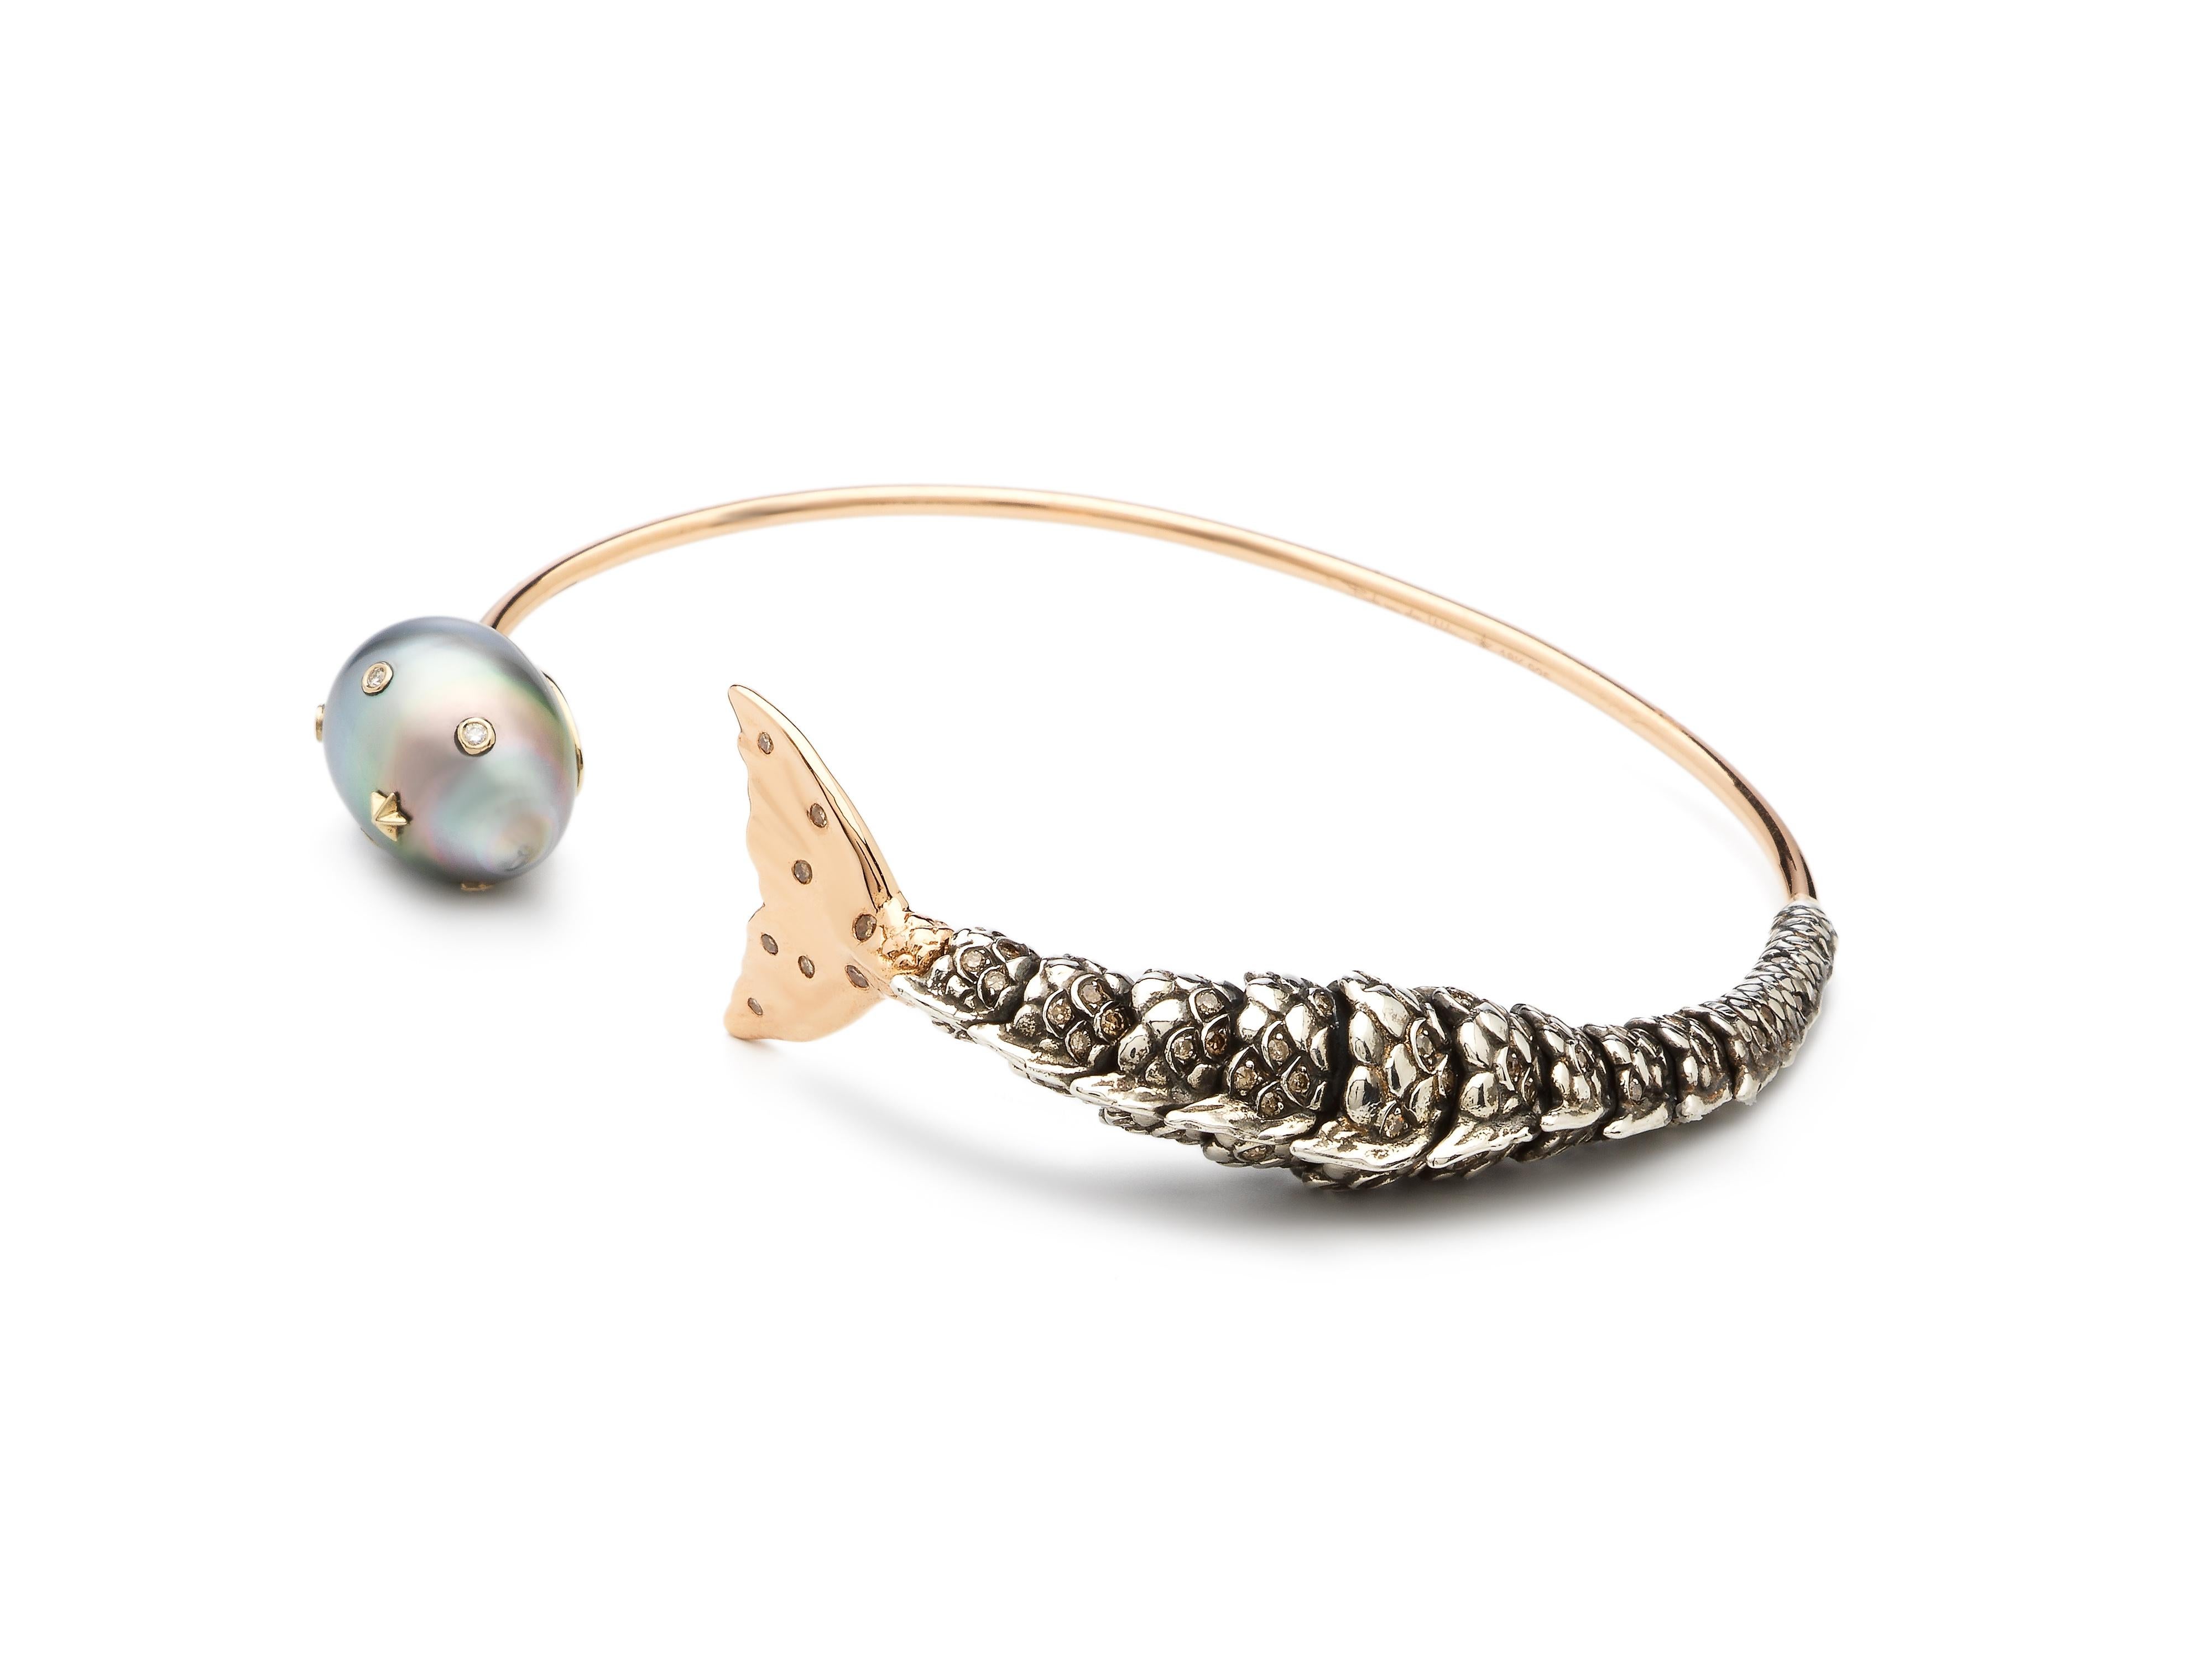 This delicate bangle is designed in 18k rose gold as an open-ended design. At one end sits a luminous Tahitian pearl, embellished with diamonds and gold stars, while at the opposite end is a mermaid’s tail, fashioned in rose gold and sterling